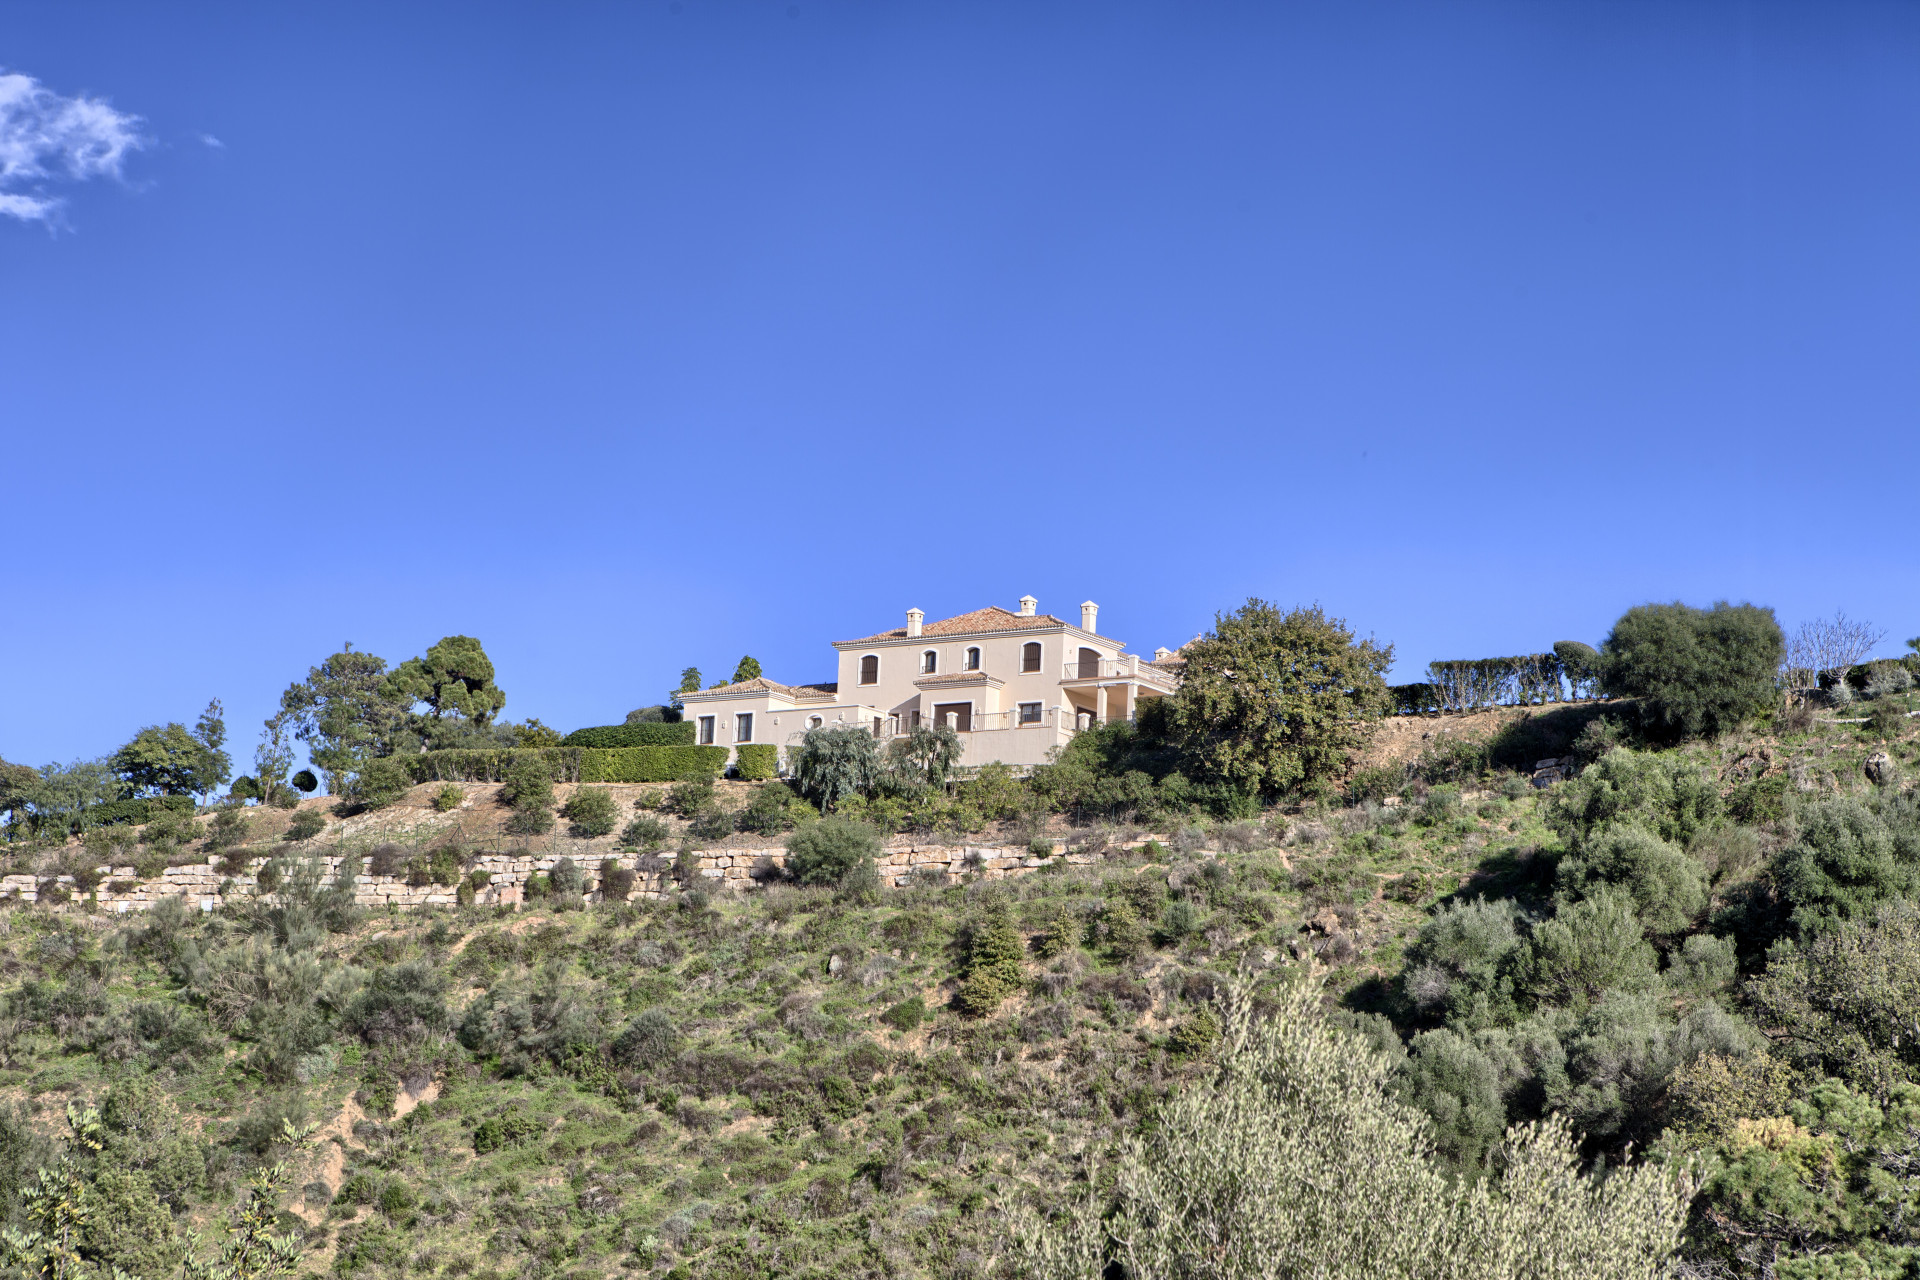 Luxury Andalusian style mansion for sale in Marbella Club Golf Resort in Benahavis